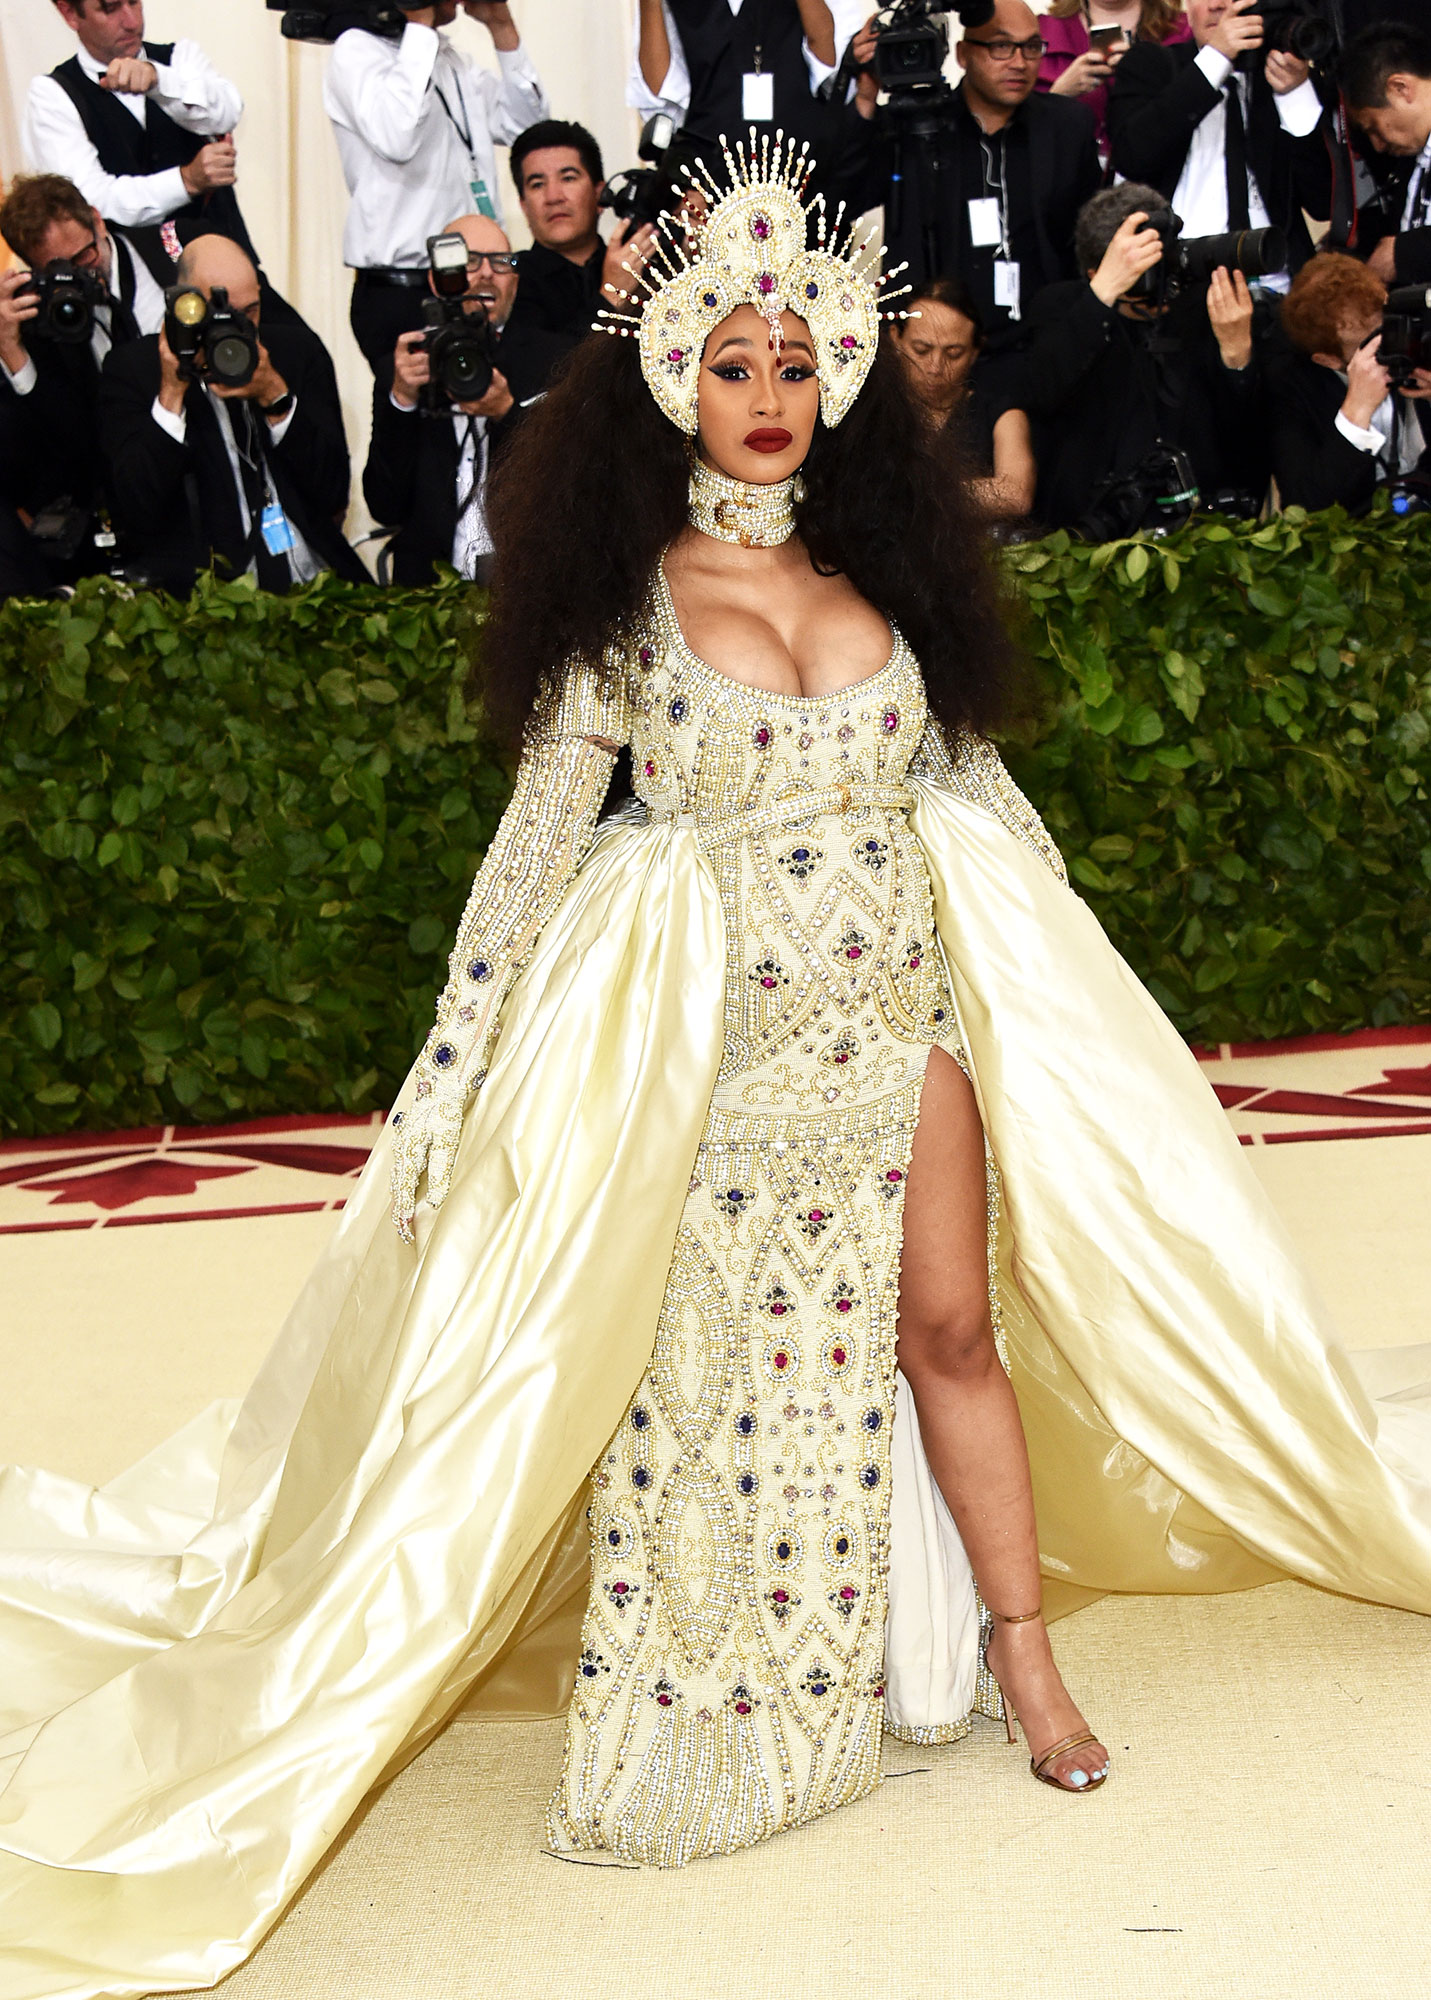 Cardi B The Wild Met Gala Red Carpet Fashion Looks We Can't Stop Thinking About